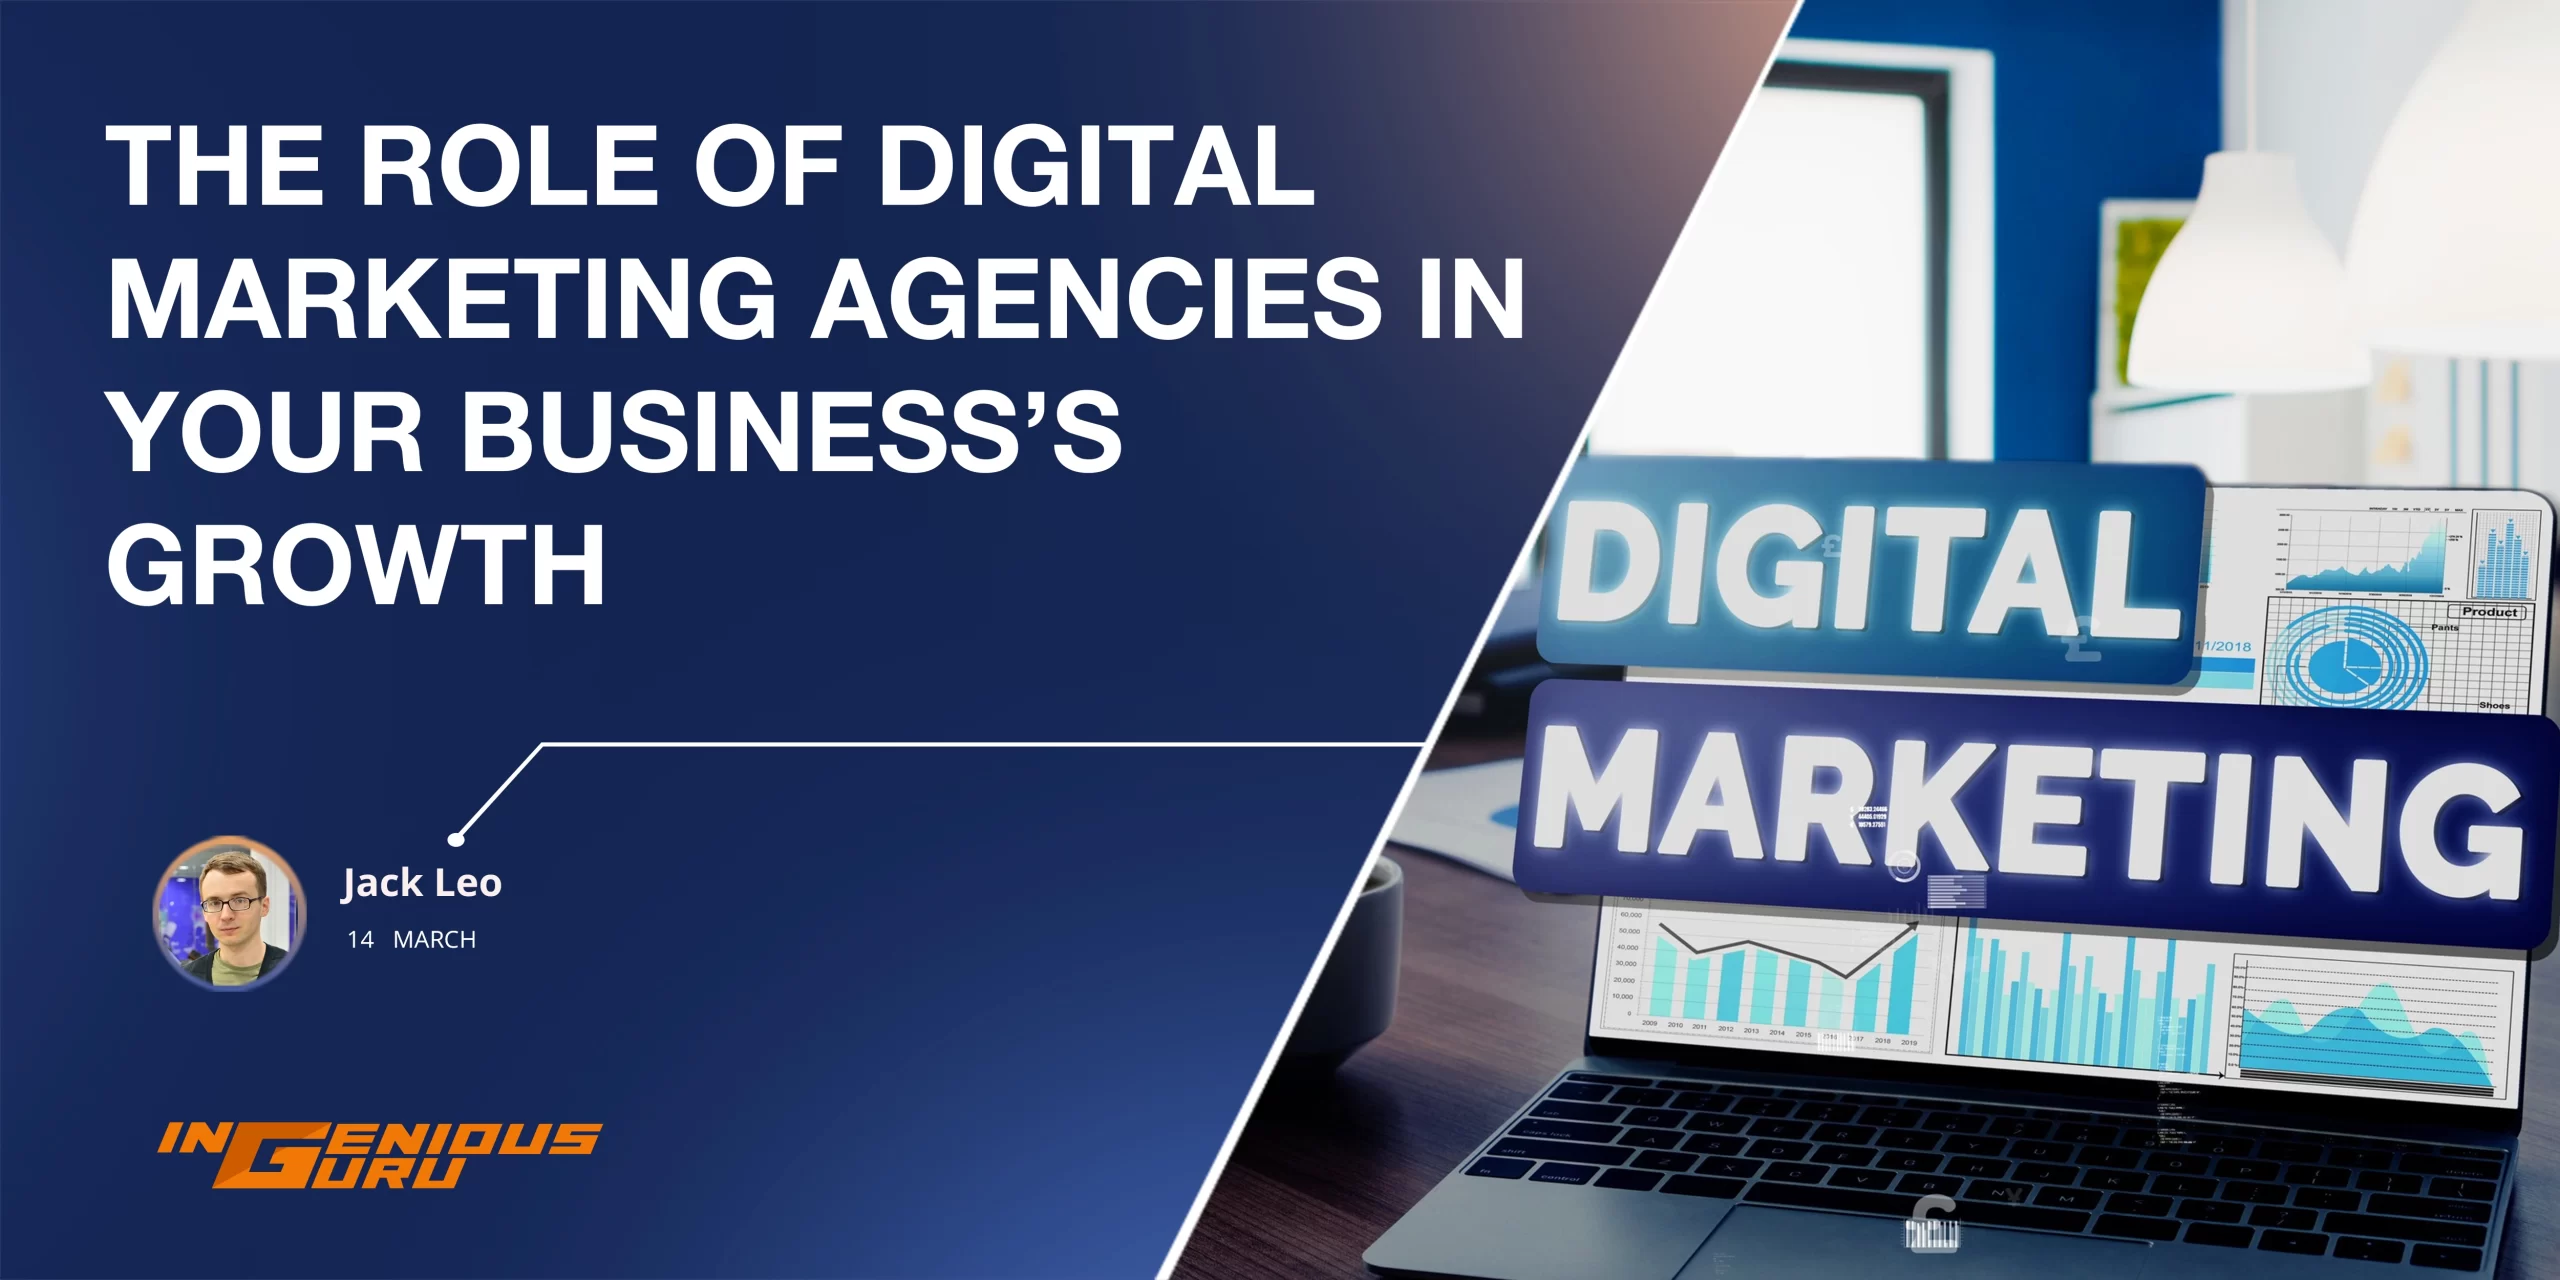 The Role of Digital Marketing Agencies in Your Business’s Growth